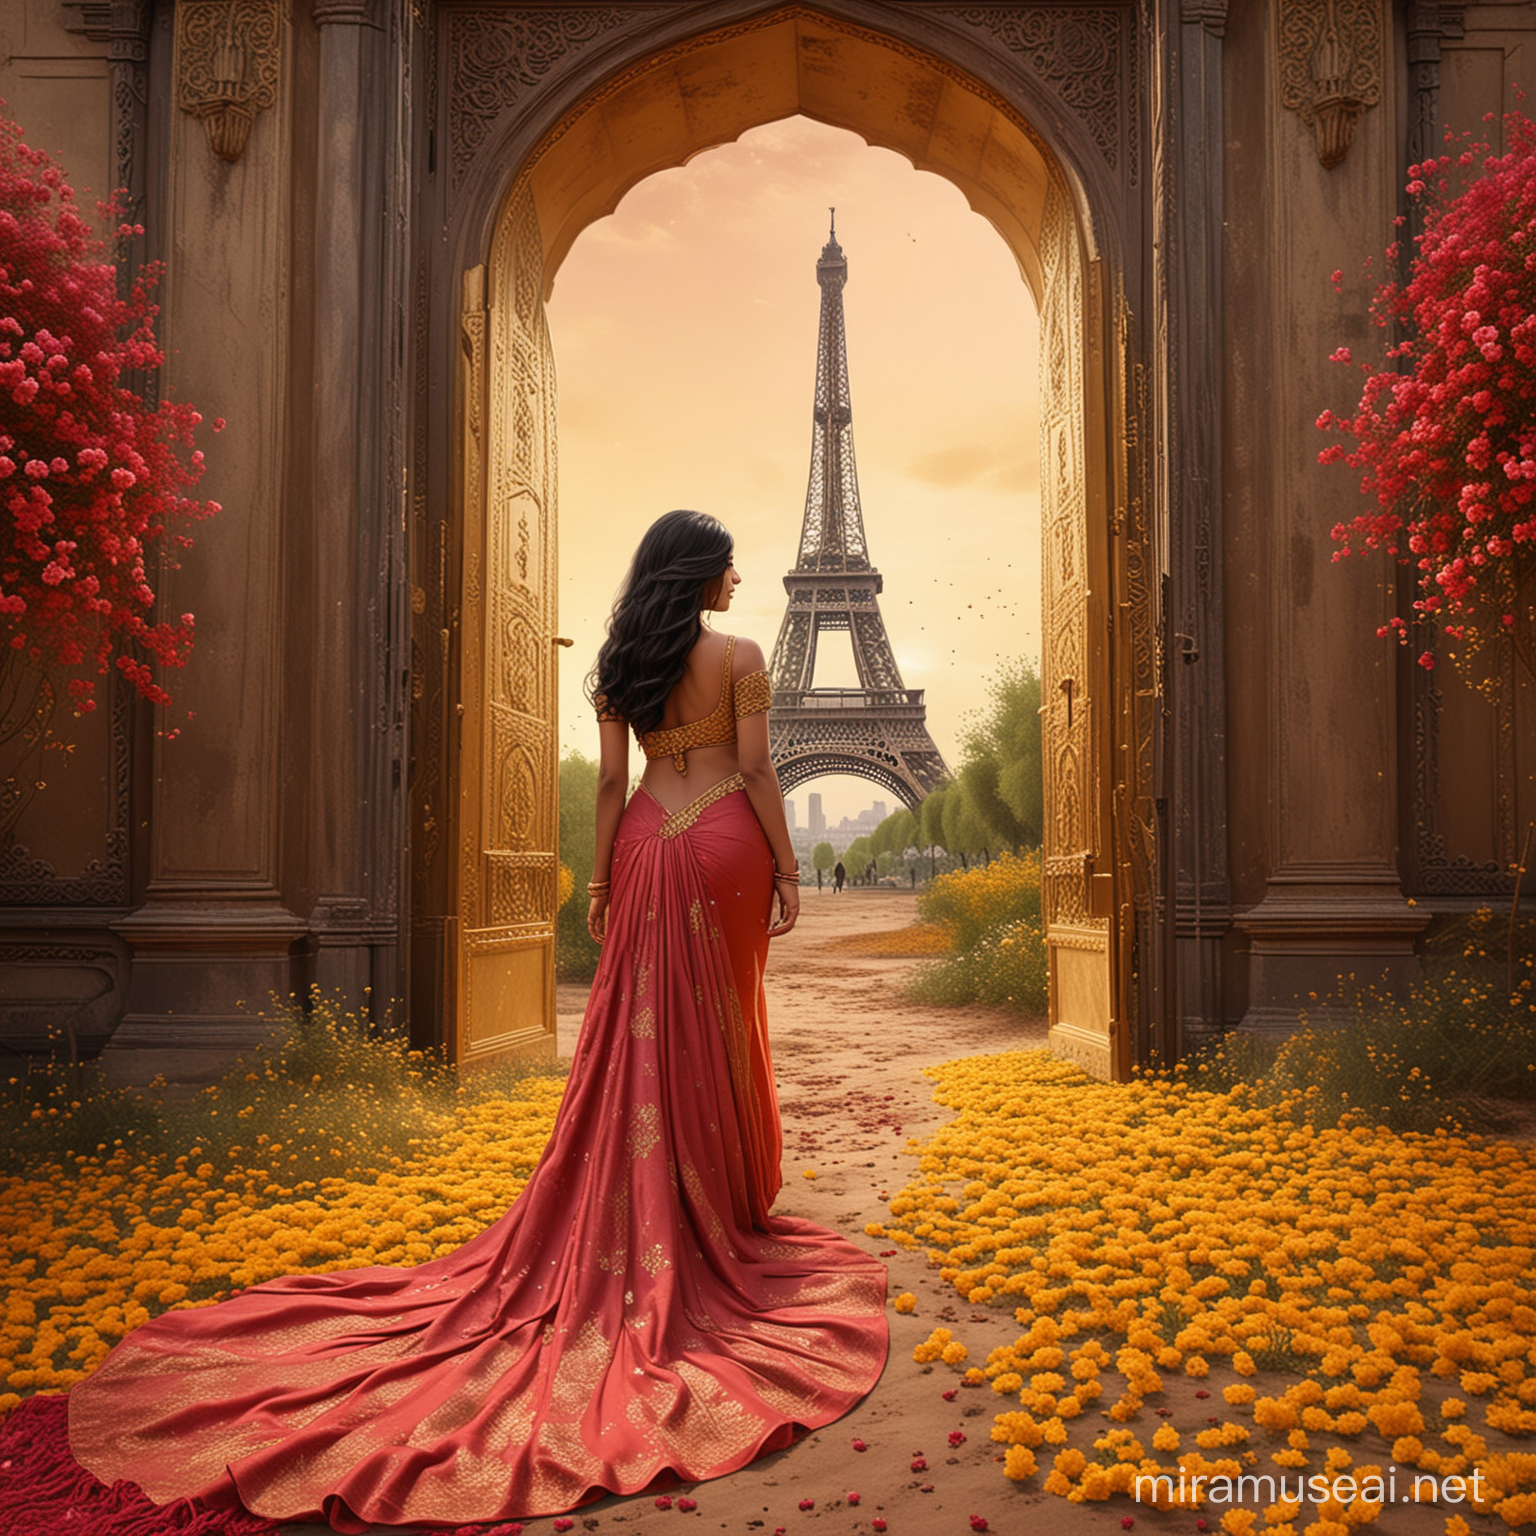 A beautiful indian princess, from behind, walking to an opened golden arabian door, surrounded by dark yellow flowers and dark pink dust on the ground. Long wavy black hair. Elegant long dark red and yellow dress, sari tissu. Background tower eiffel surrounded by flowers. background floral trees. 8k, fantasy, illustration, digital art, illustration art, fantasy art, fantasy style